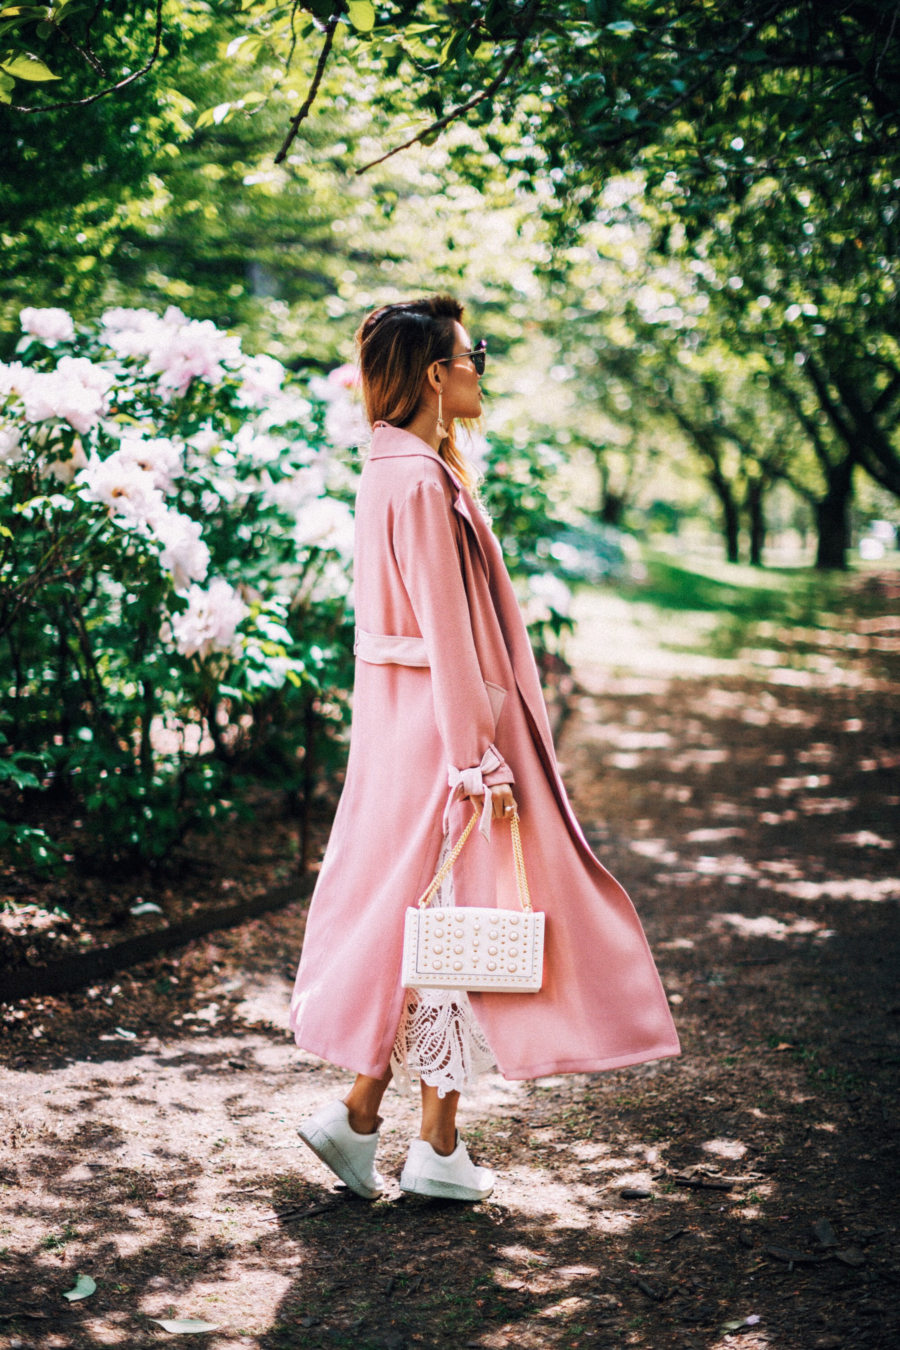 Pink Trench White Dress - 9 Fresh Ways To Style Your Favorite Trench Coat For Any Occasion This Spring // NotJessFashion.com